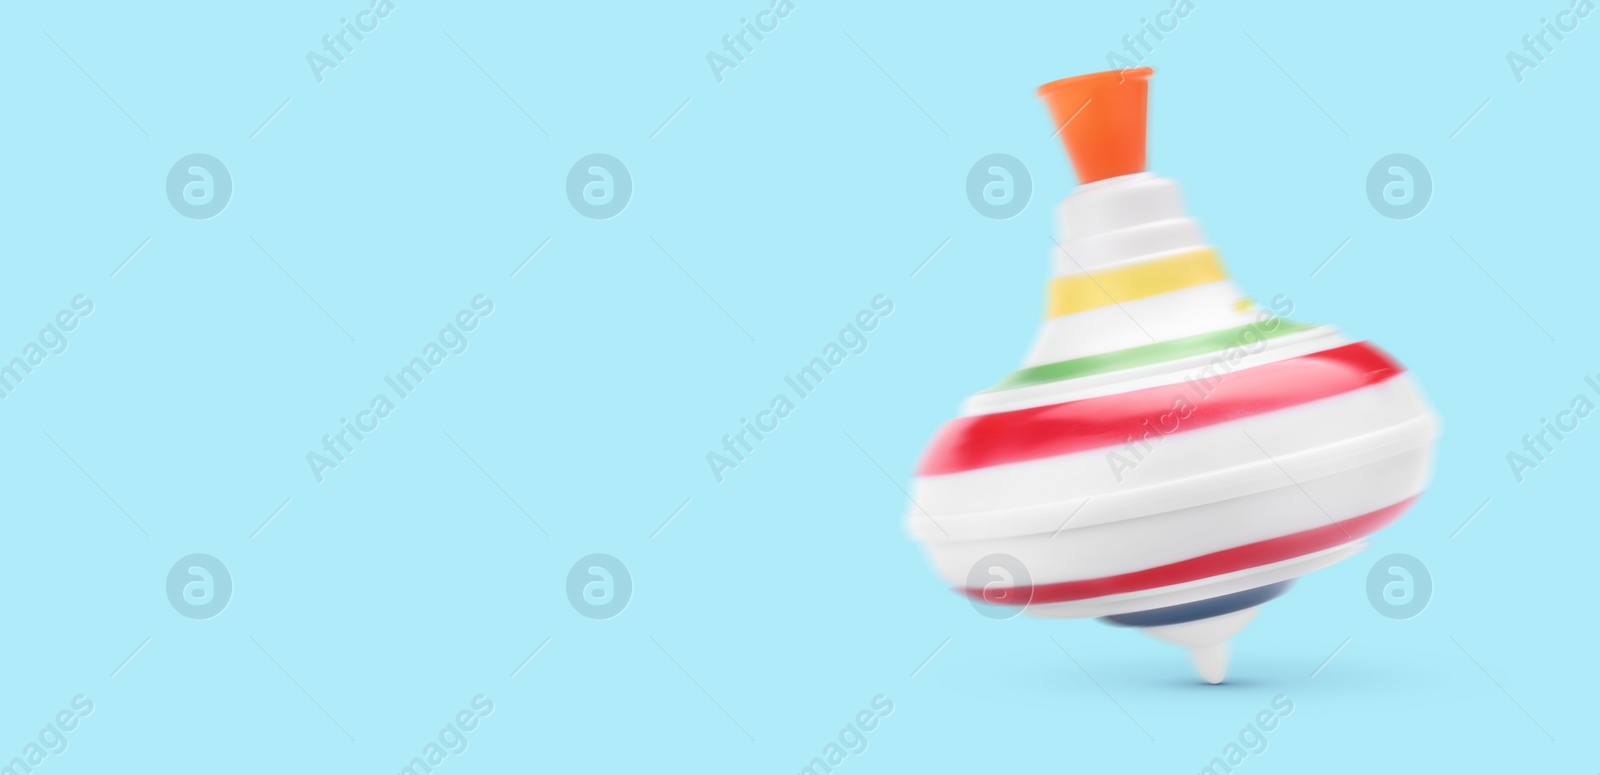 Image of One spinning top in motion on light blue background, banner design with space for text. Toy whirligig